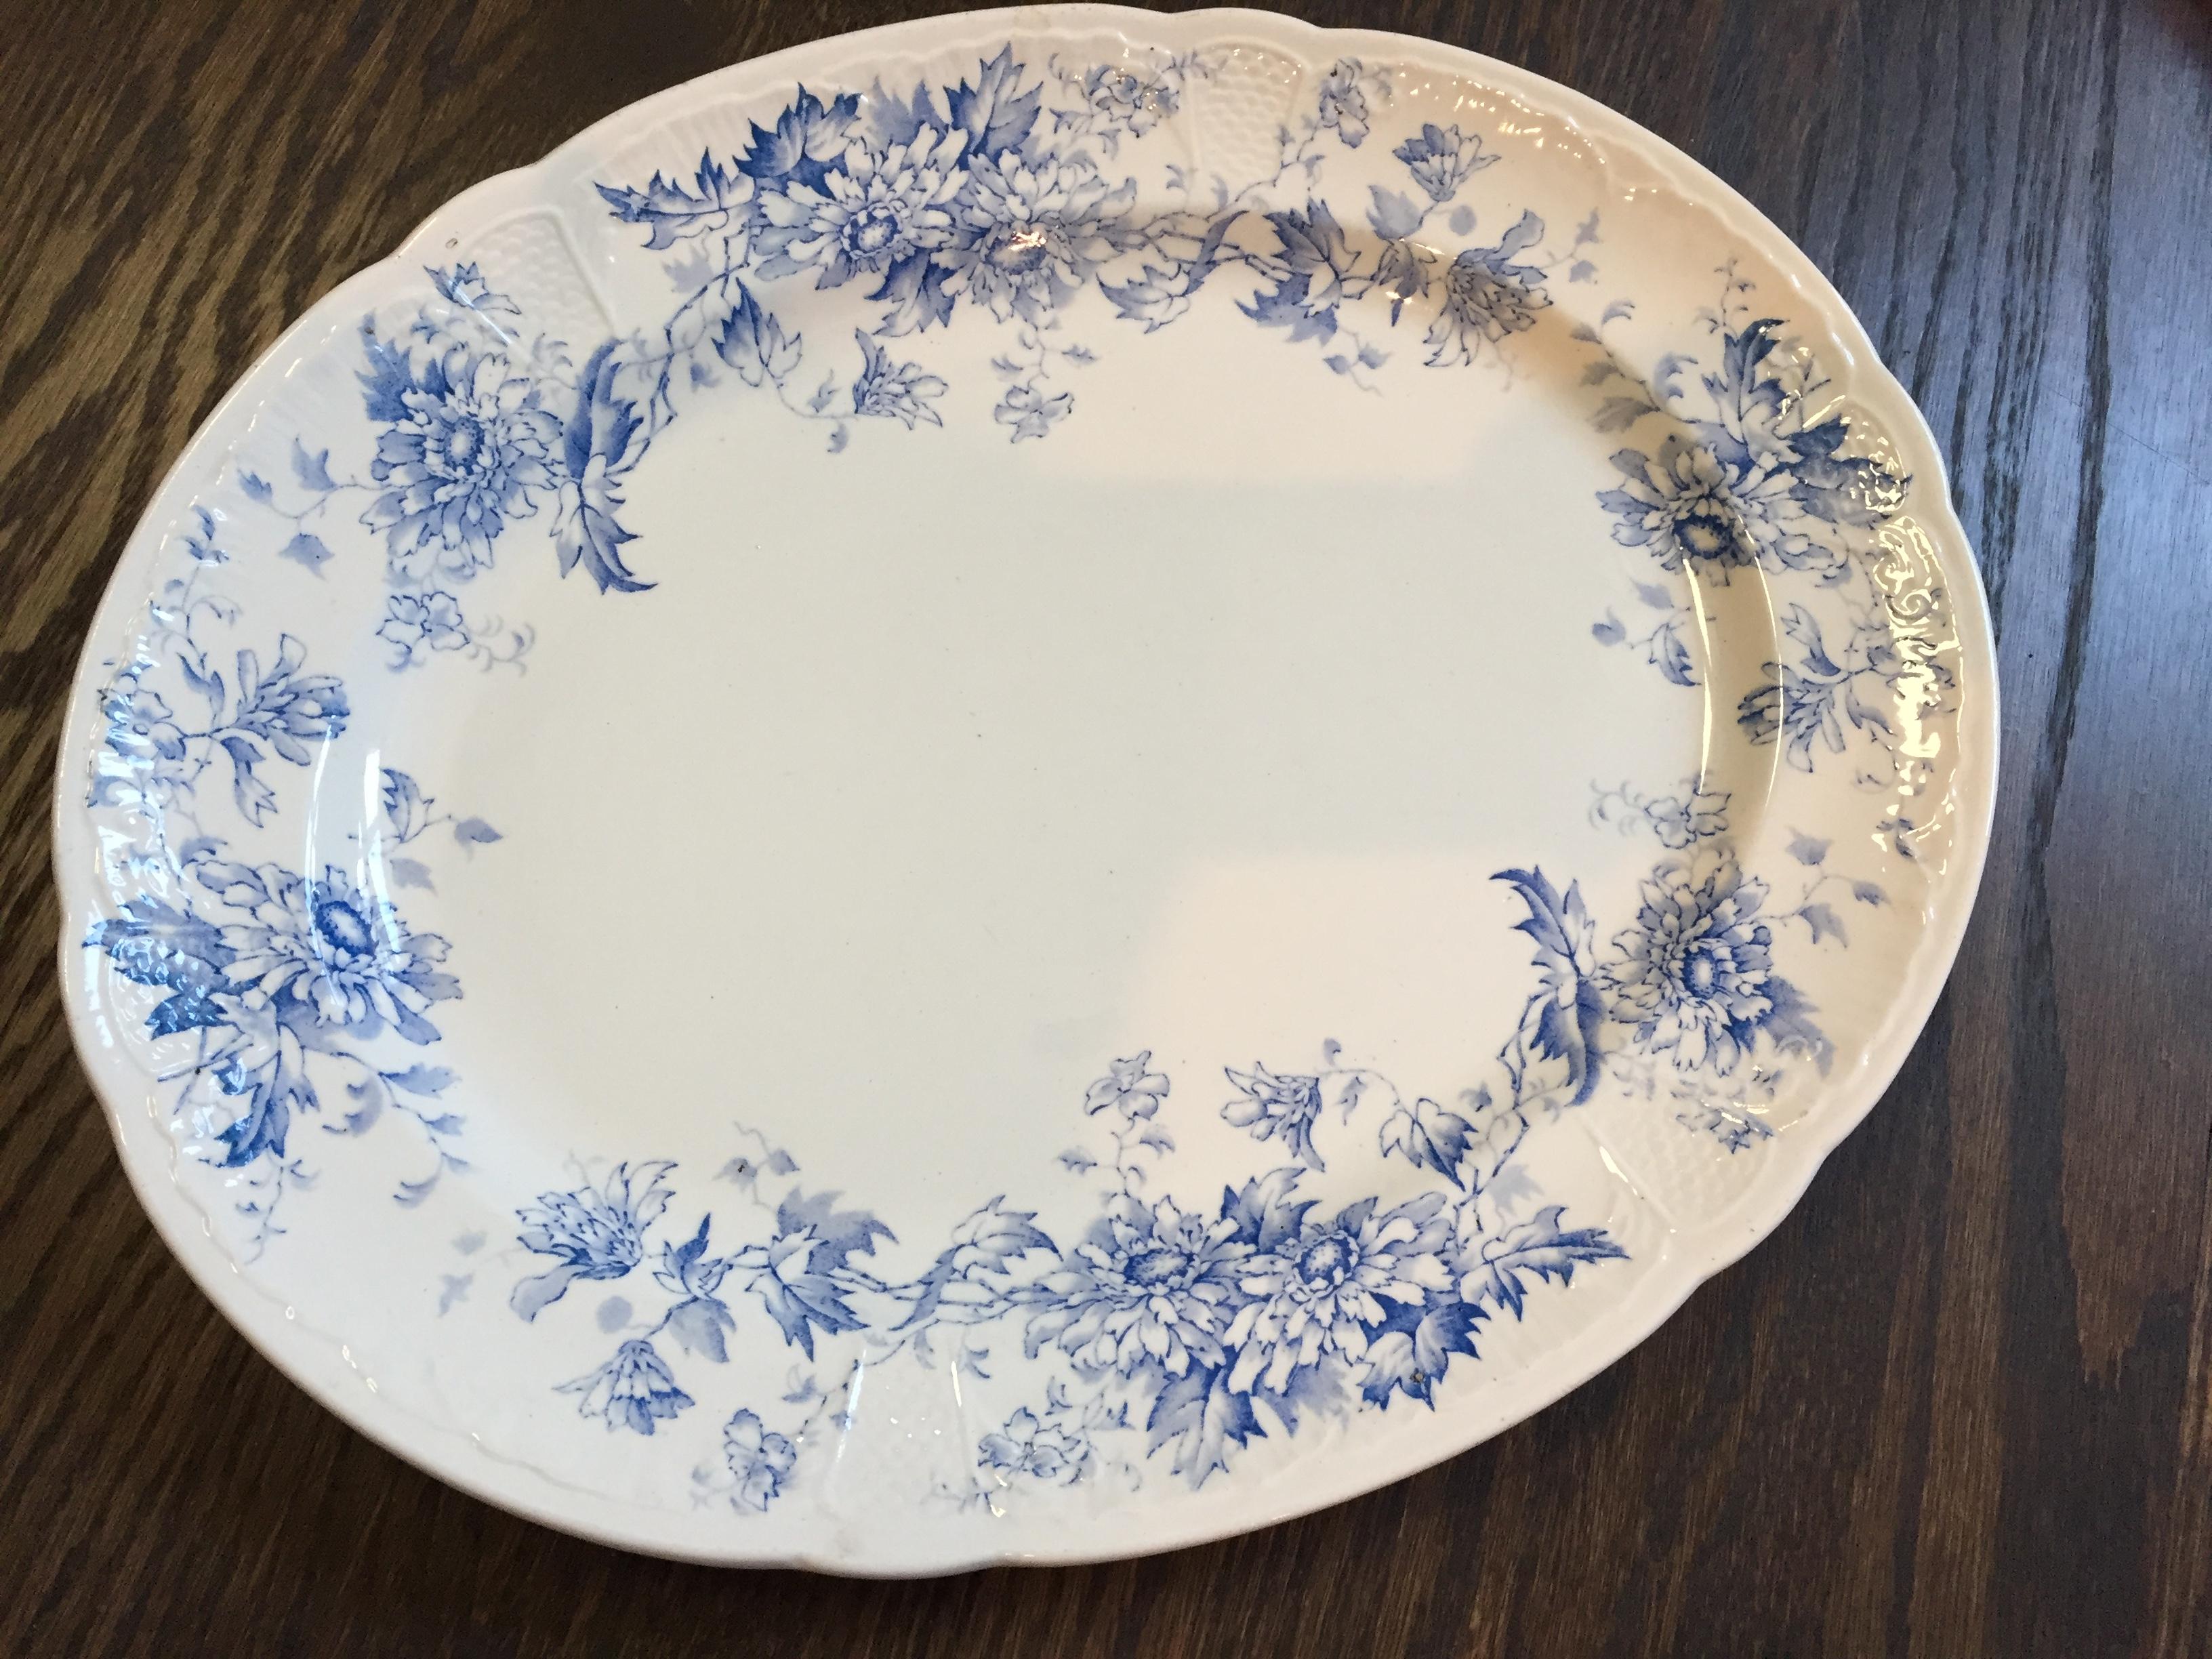 Vintage oversized decorative English platter
Stamped Aster K & C
Perfect on your wall or on your table.